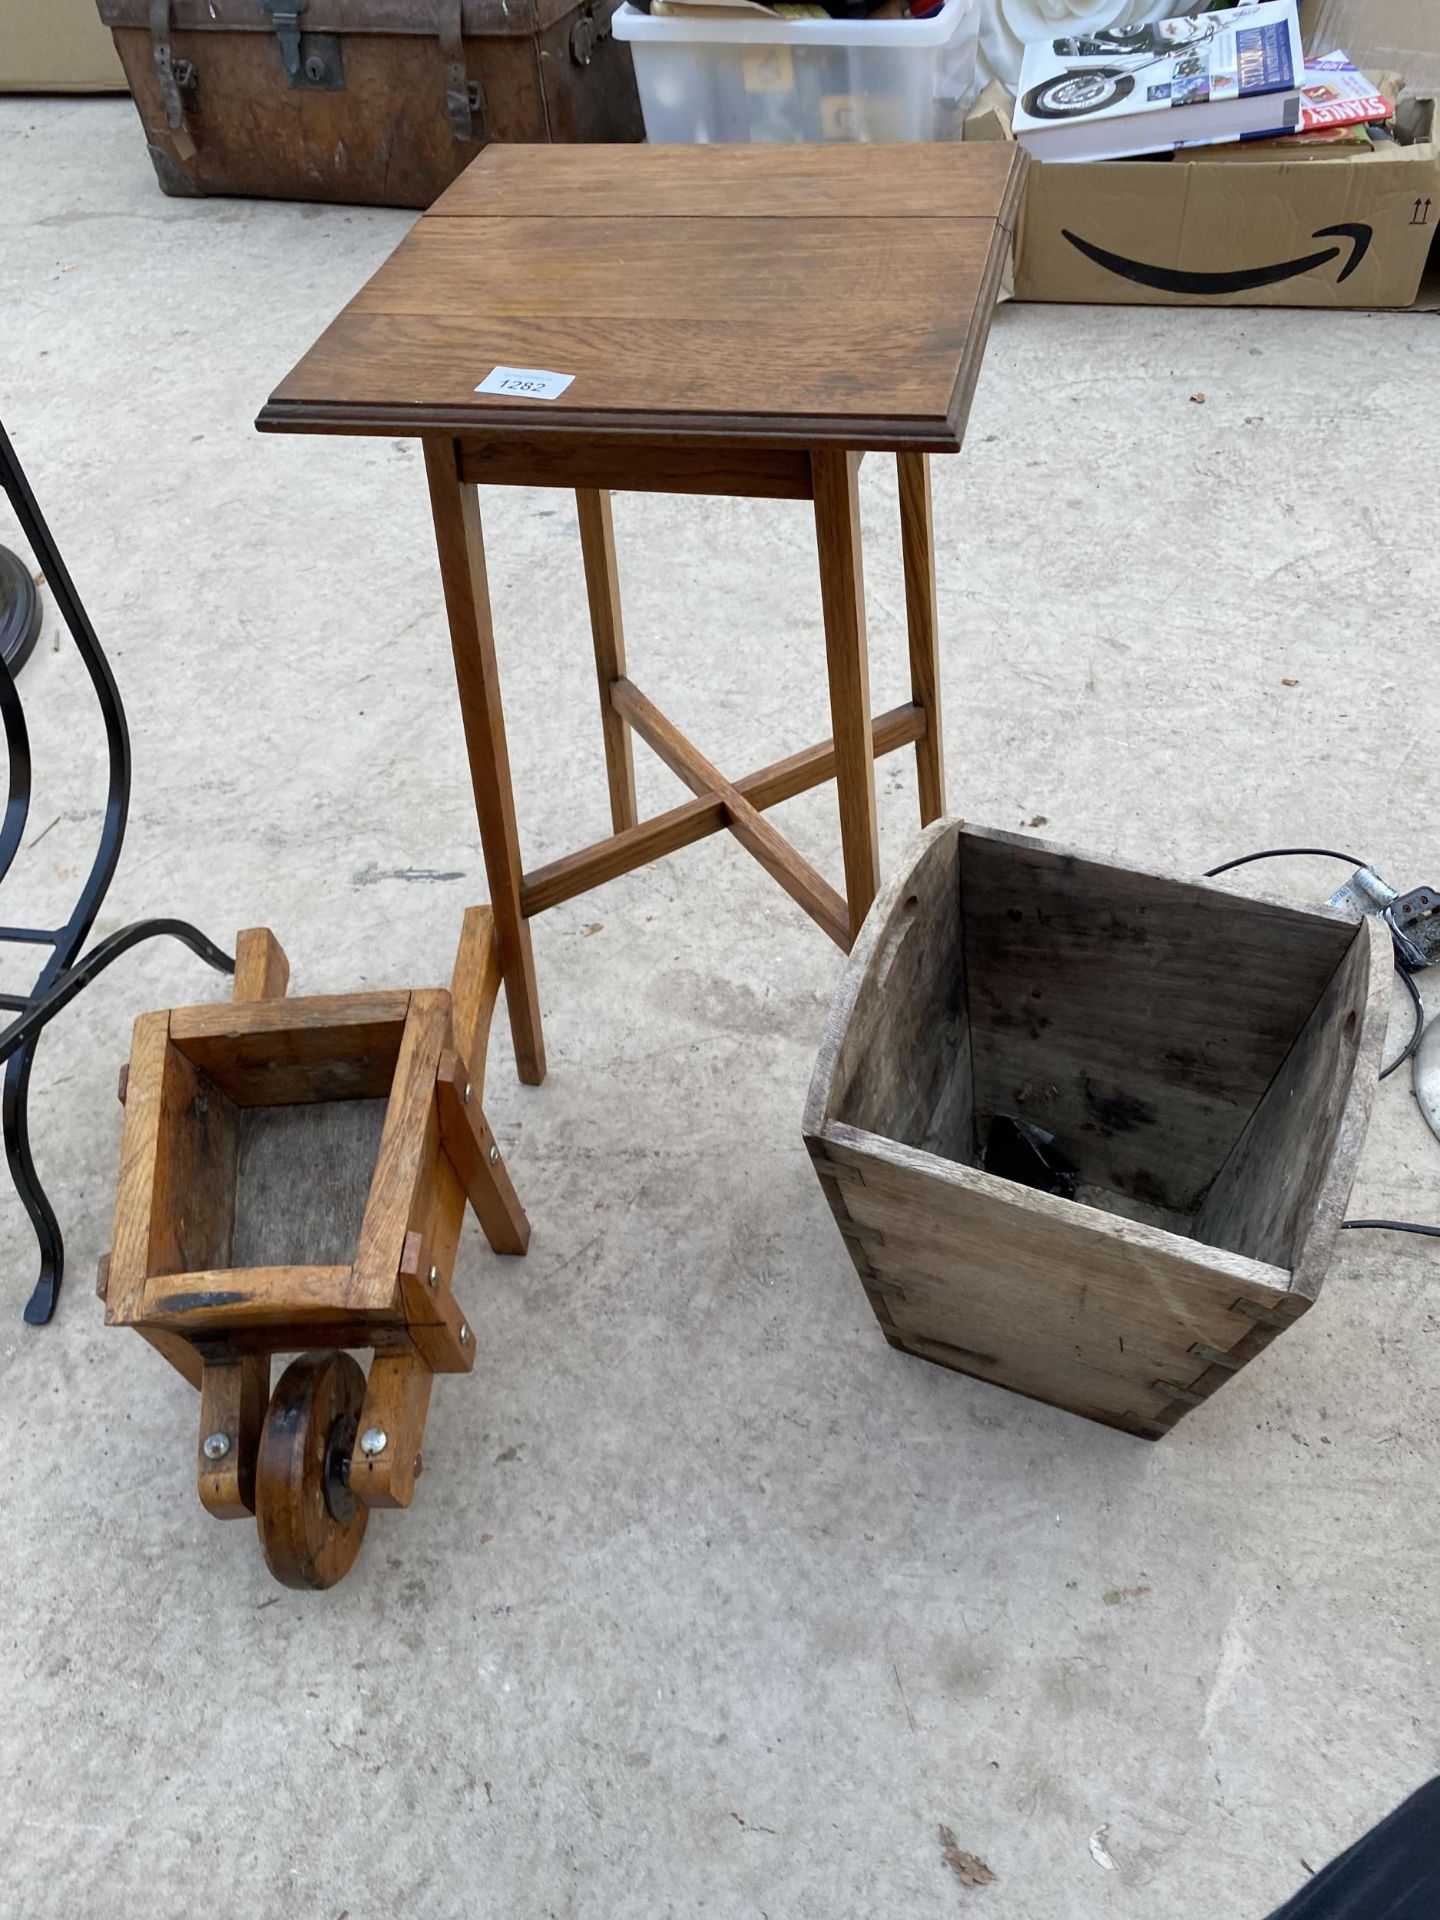 A MINITURE WOODEN WHEEL BARROW, A STOOL AND A VINTAGE WOODEN BOX